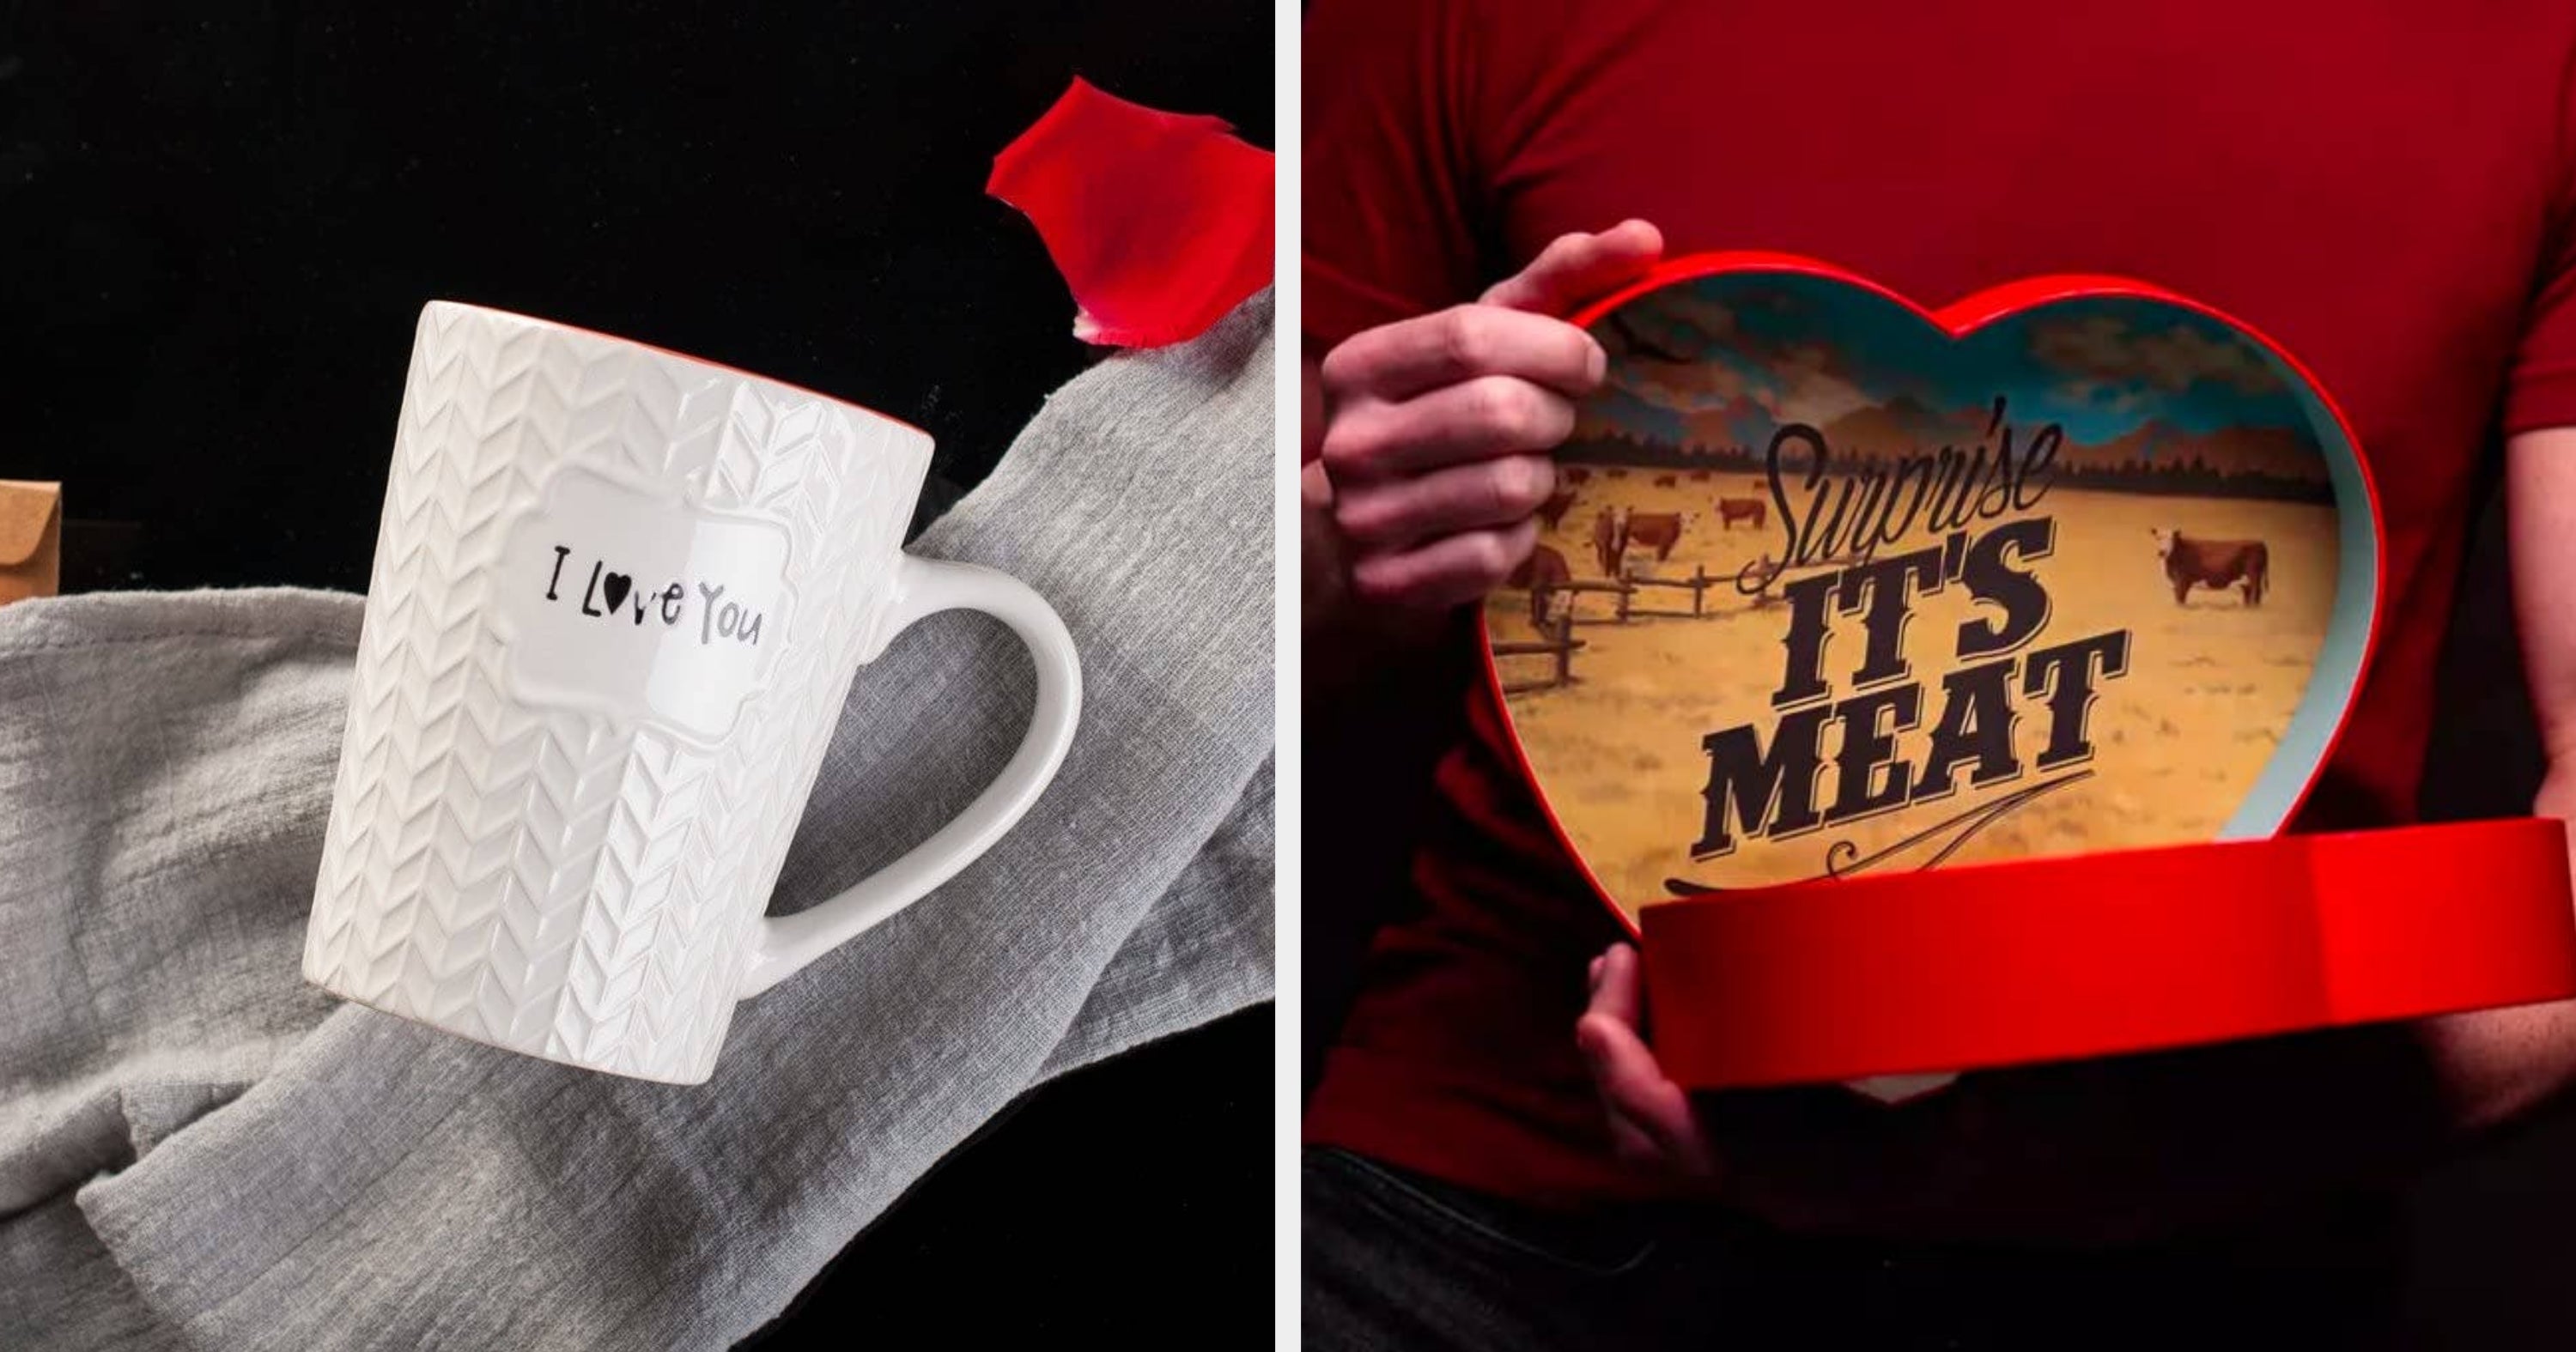 35 Meaningful Gifts To Get Your Significant Other